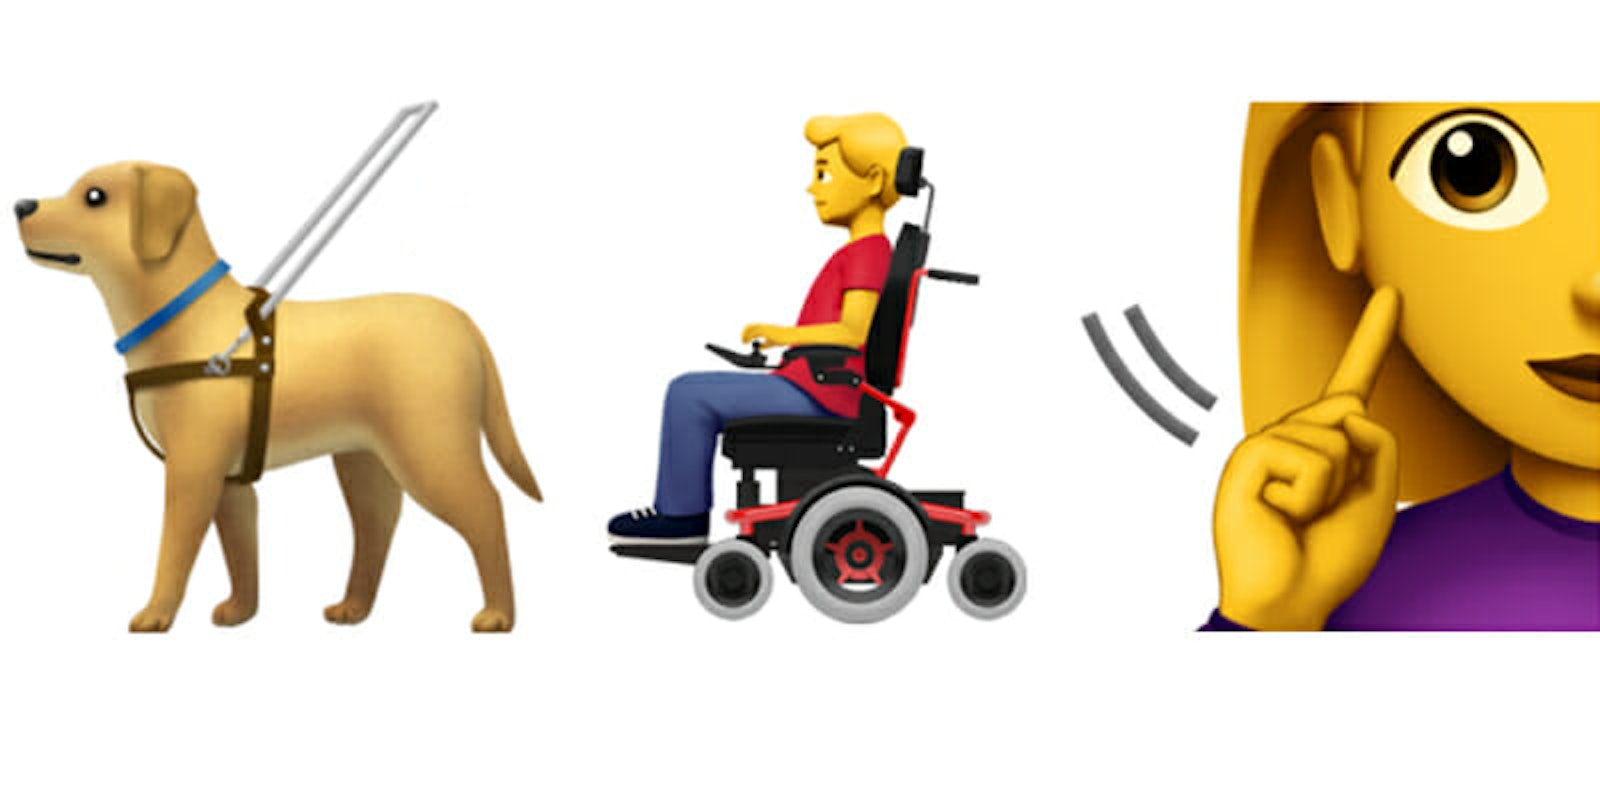 Apple has proposed emoji that represent people with disabilities.